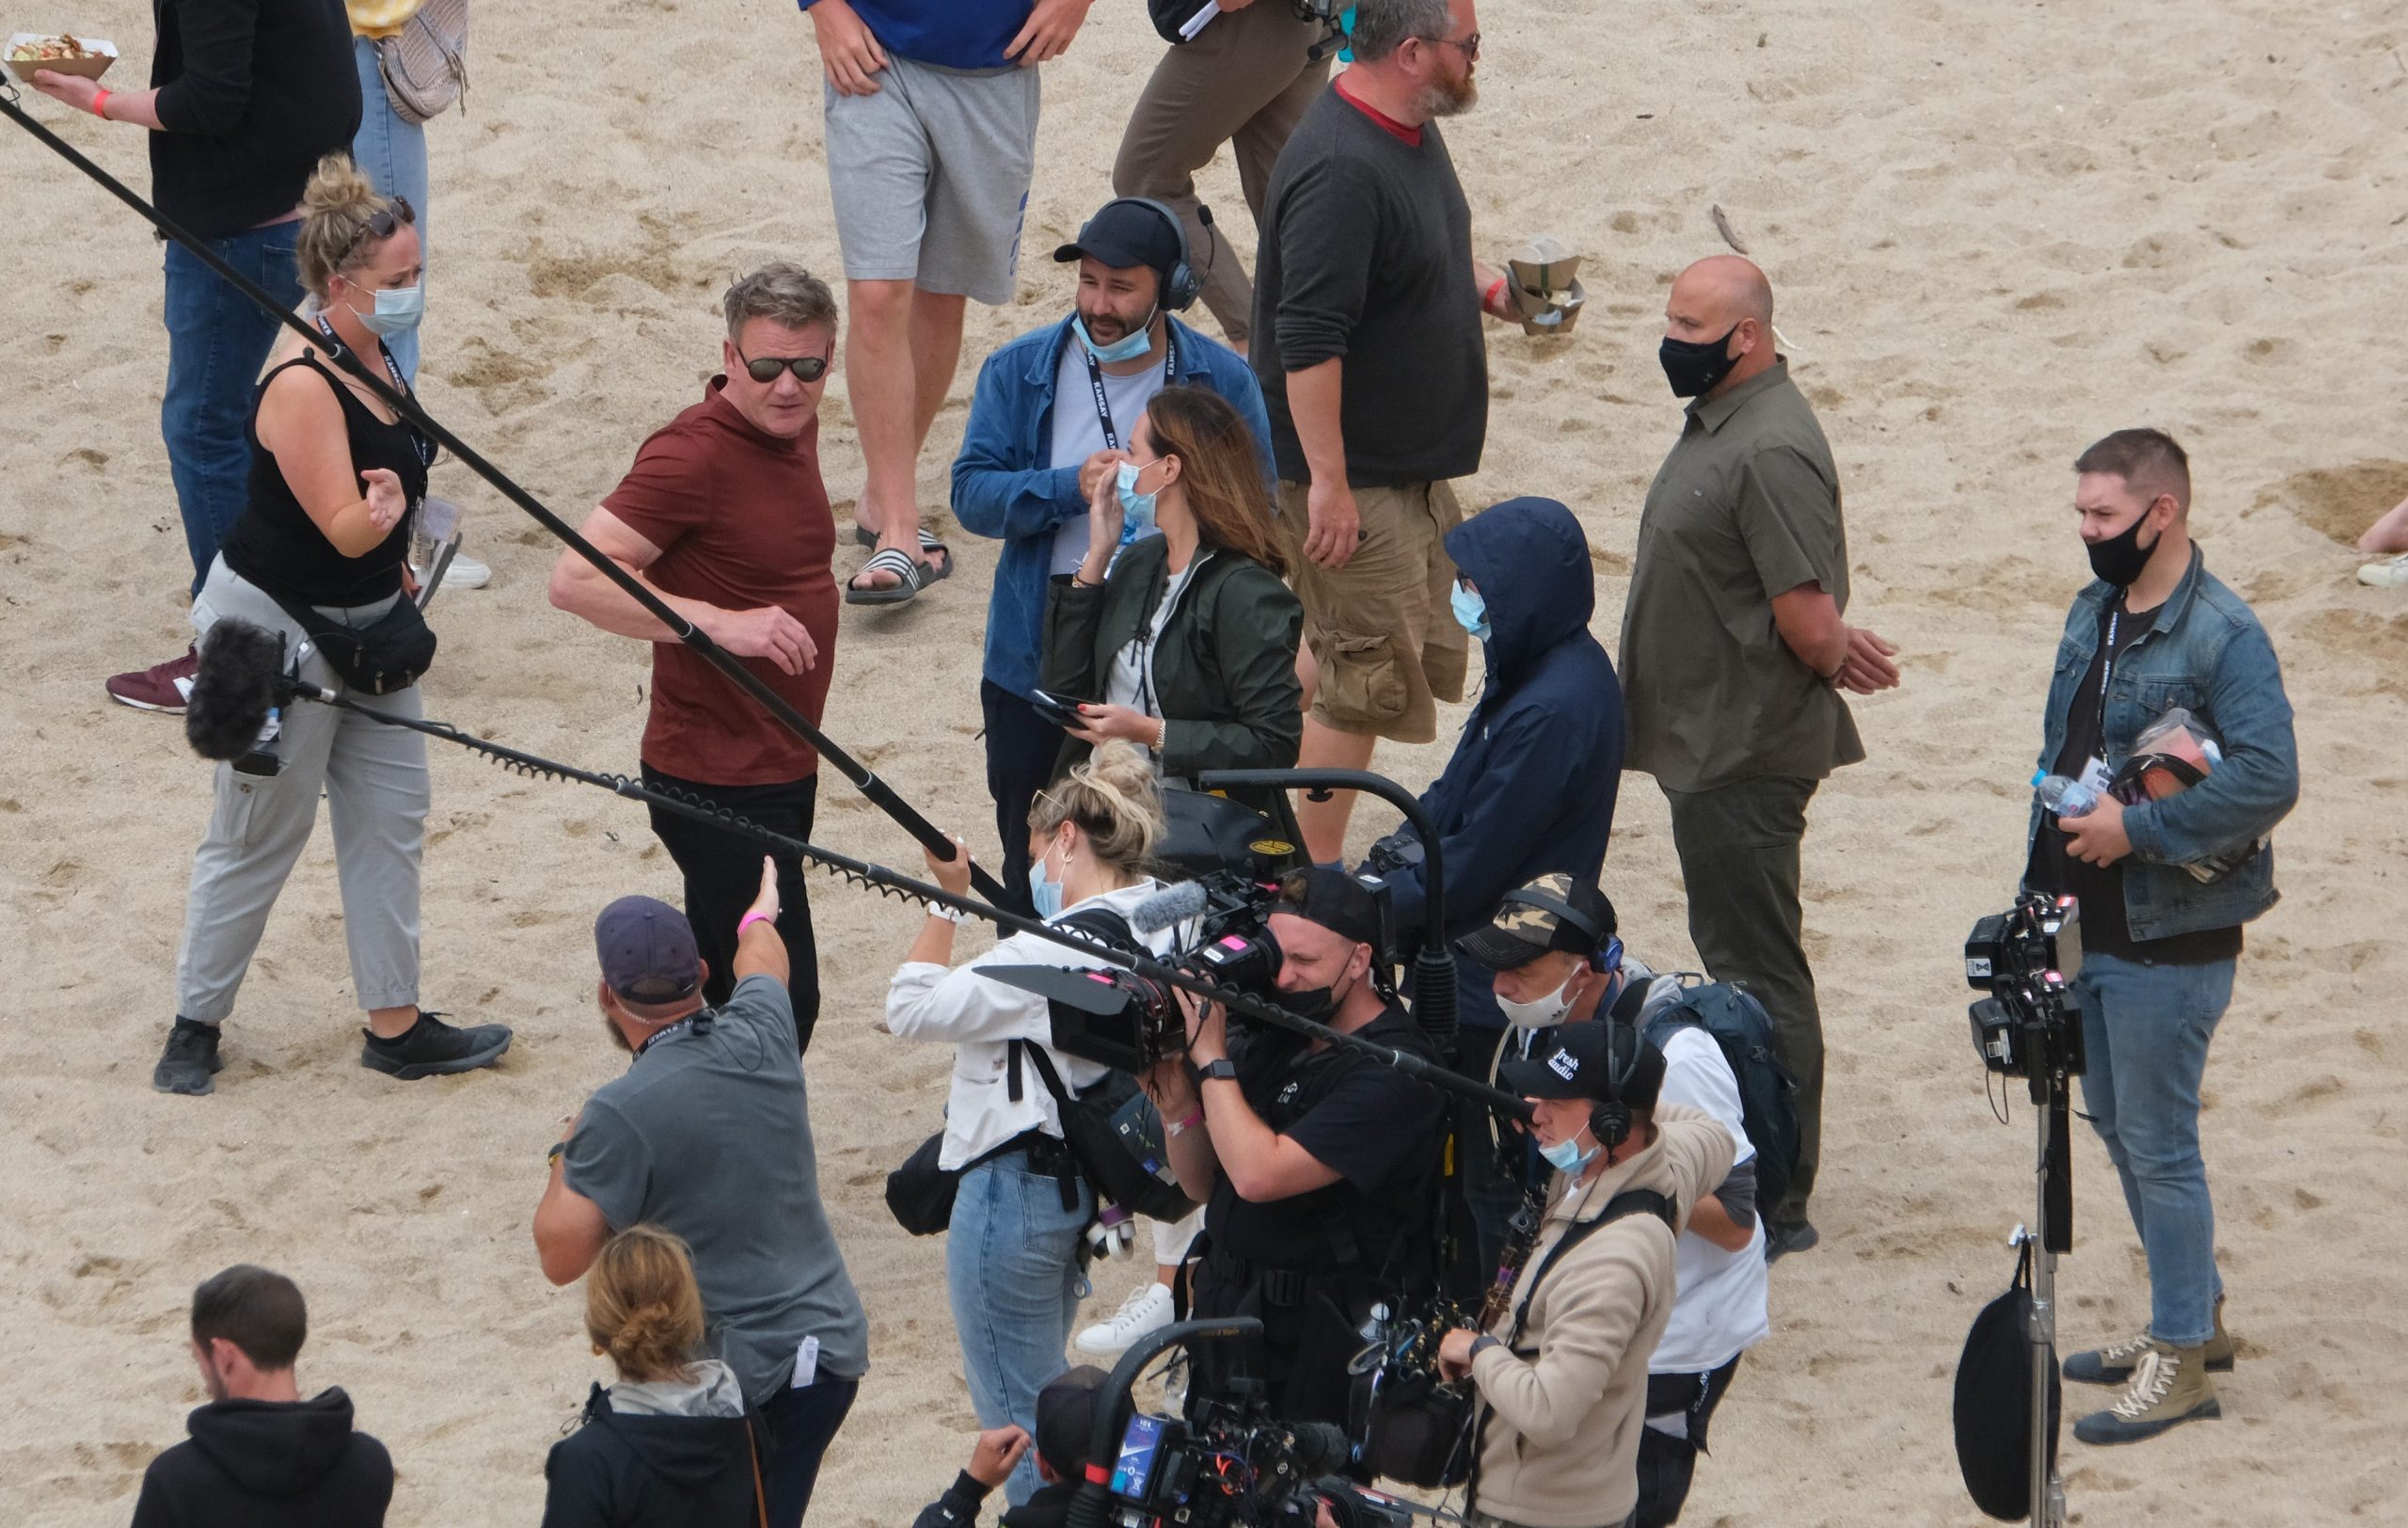 Gordon Ramsay pictured on Lusty Beach in Newquay, Cornwall, filming his new TV show "Future Food Stars."